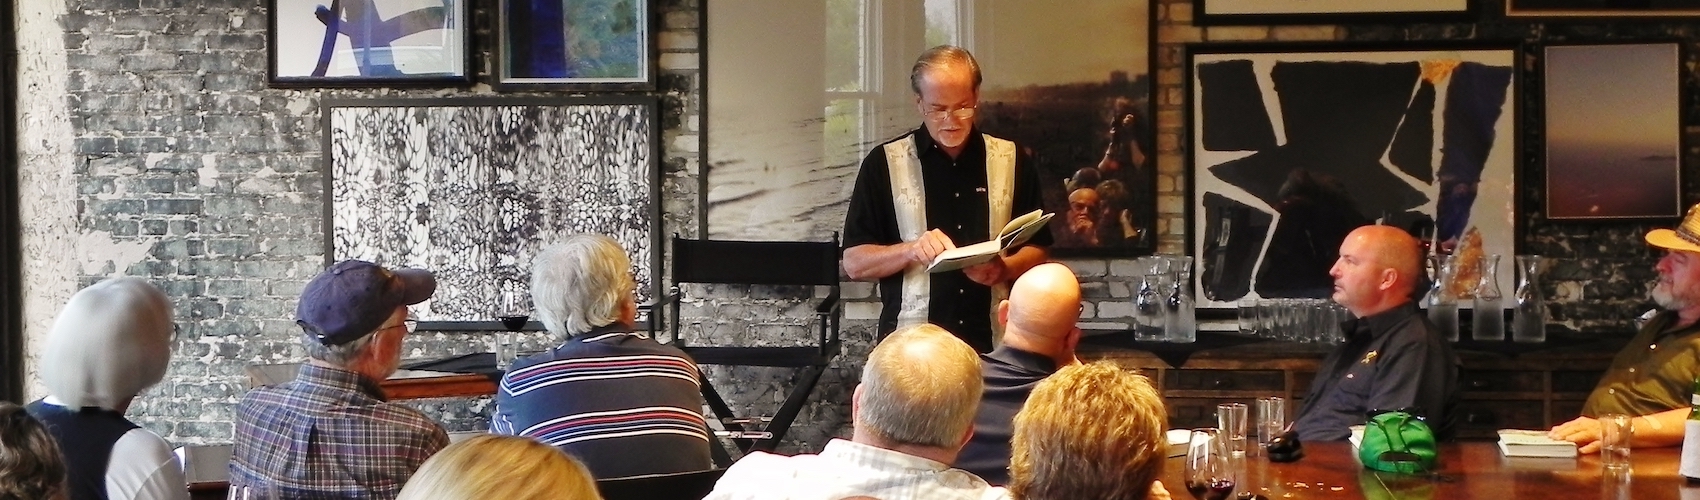 Author Robert Macomber reads aloud from Honoring the Enemy at Oxford Exchange book signing.